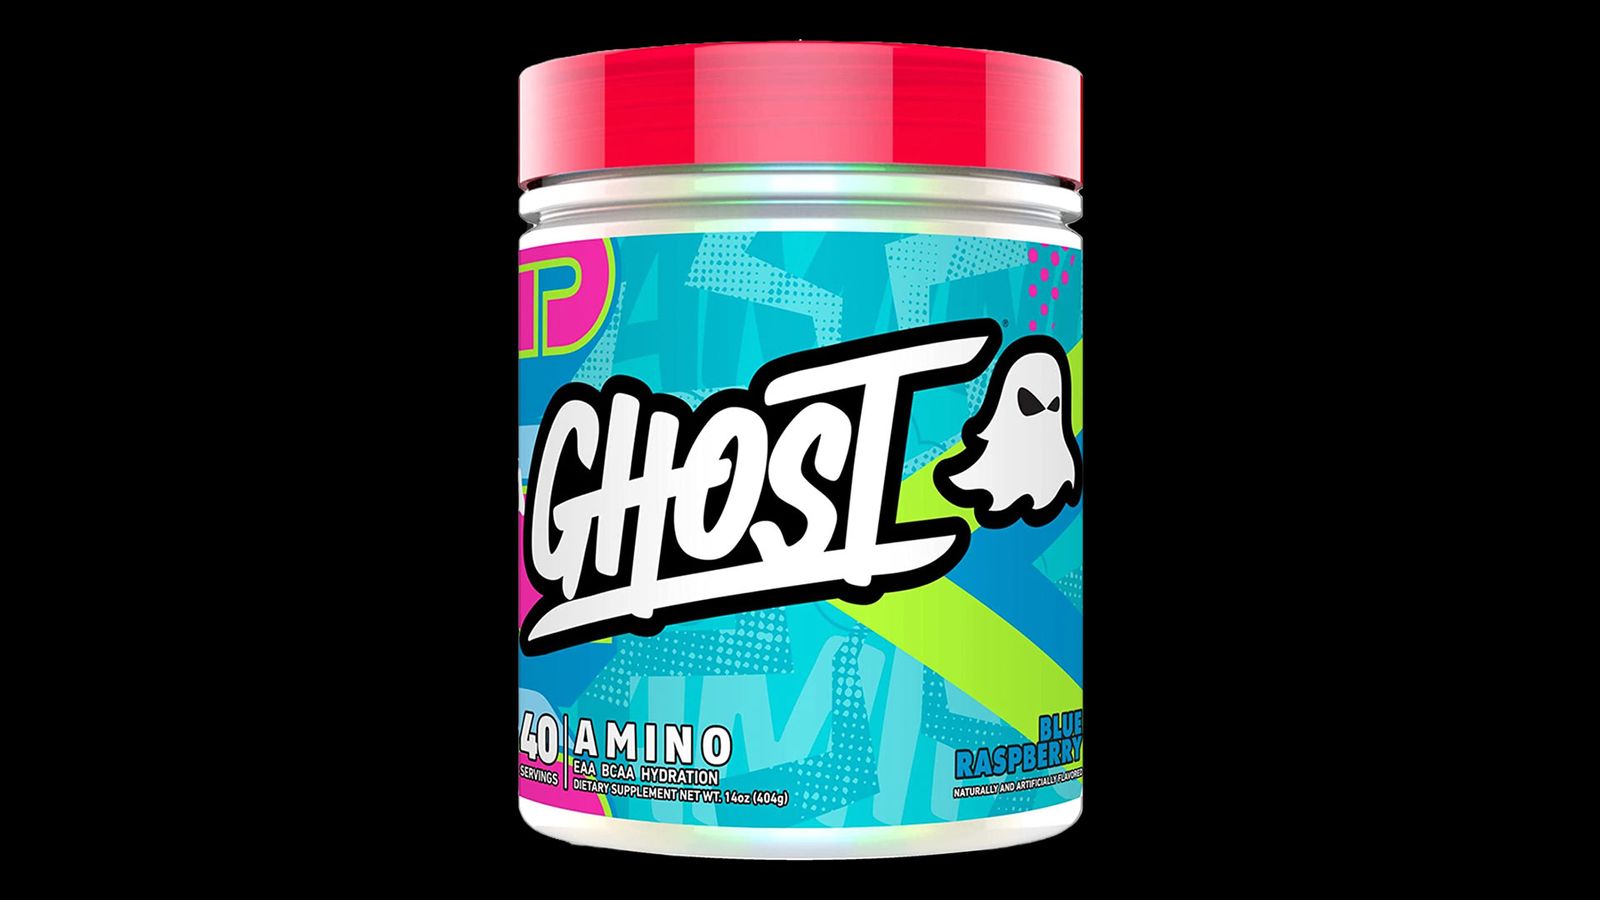 GHOST Amino product image of a clear container with light blue and purple branding and a red lid.